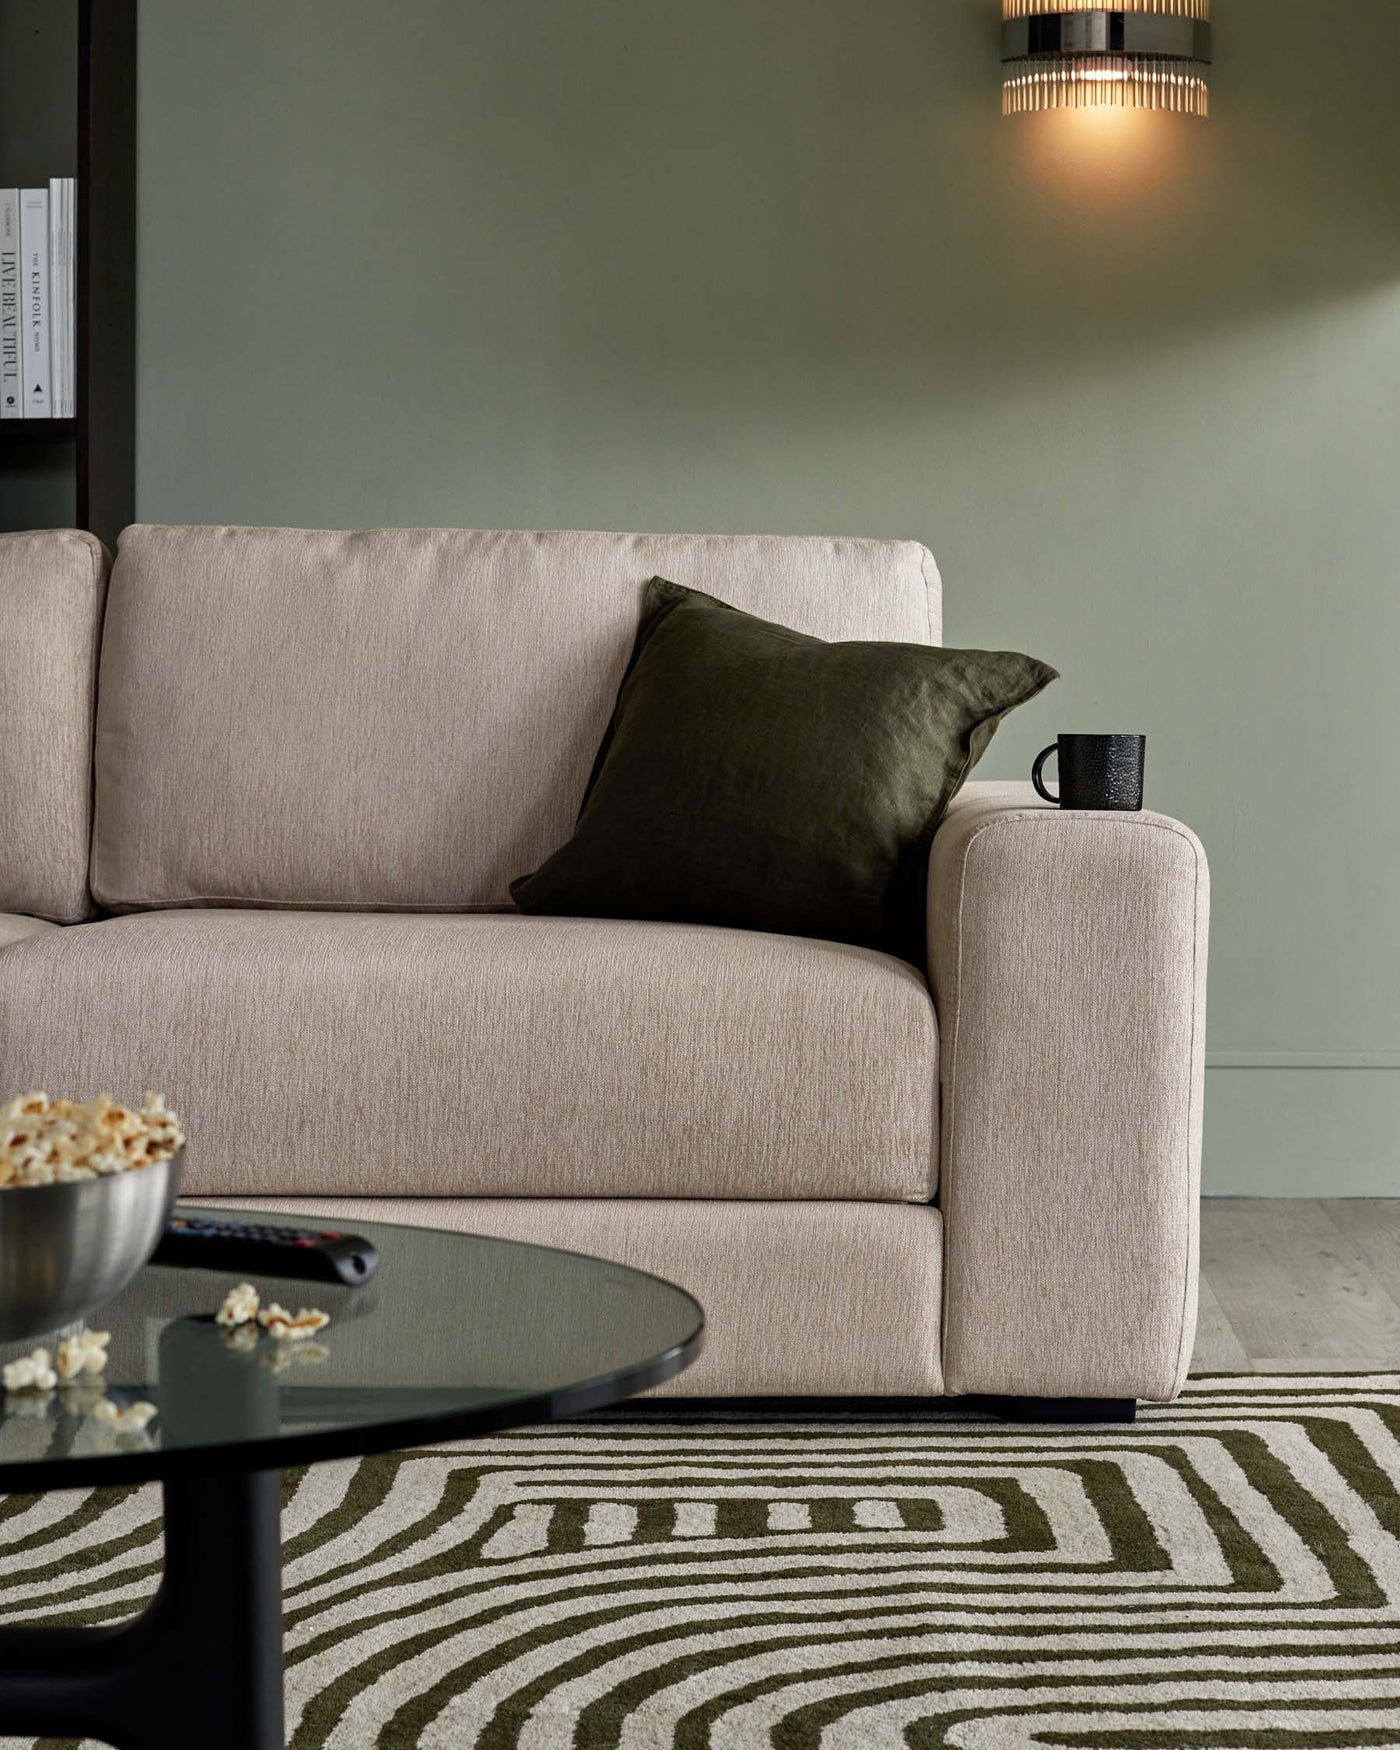 A modern beige upholstered sofa with clean lines and a plush cushioned seat, featuring a matching beige armrest integrated with a dark wood side table, accented by a single dark green throw pillow. In the foreground, a low-profile black round coffee table is situated on a patterned area rug with geometric designs, holding a bowl of popcorn and a remote control. A stylish hanging light fixture provides ambient lighting in the background.